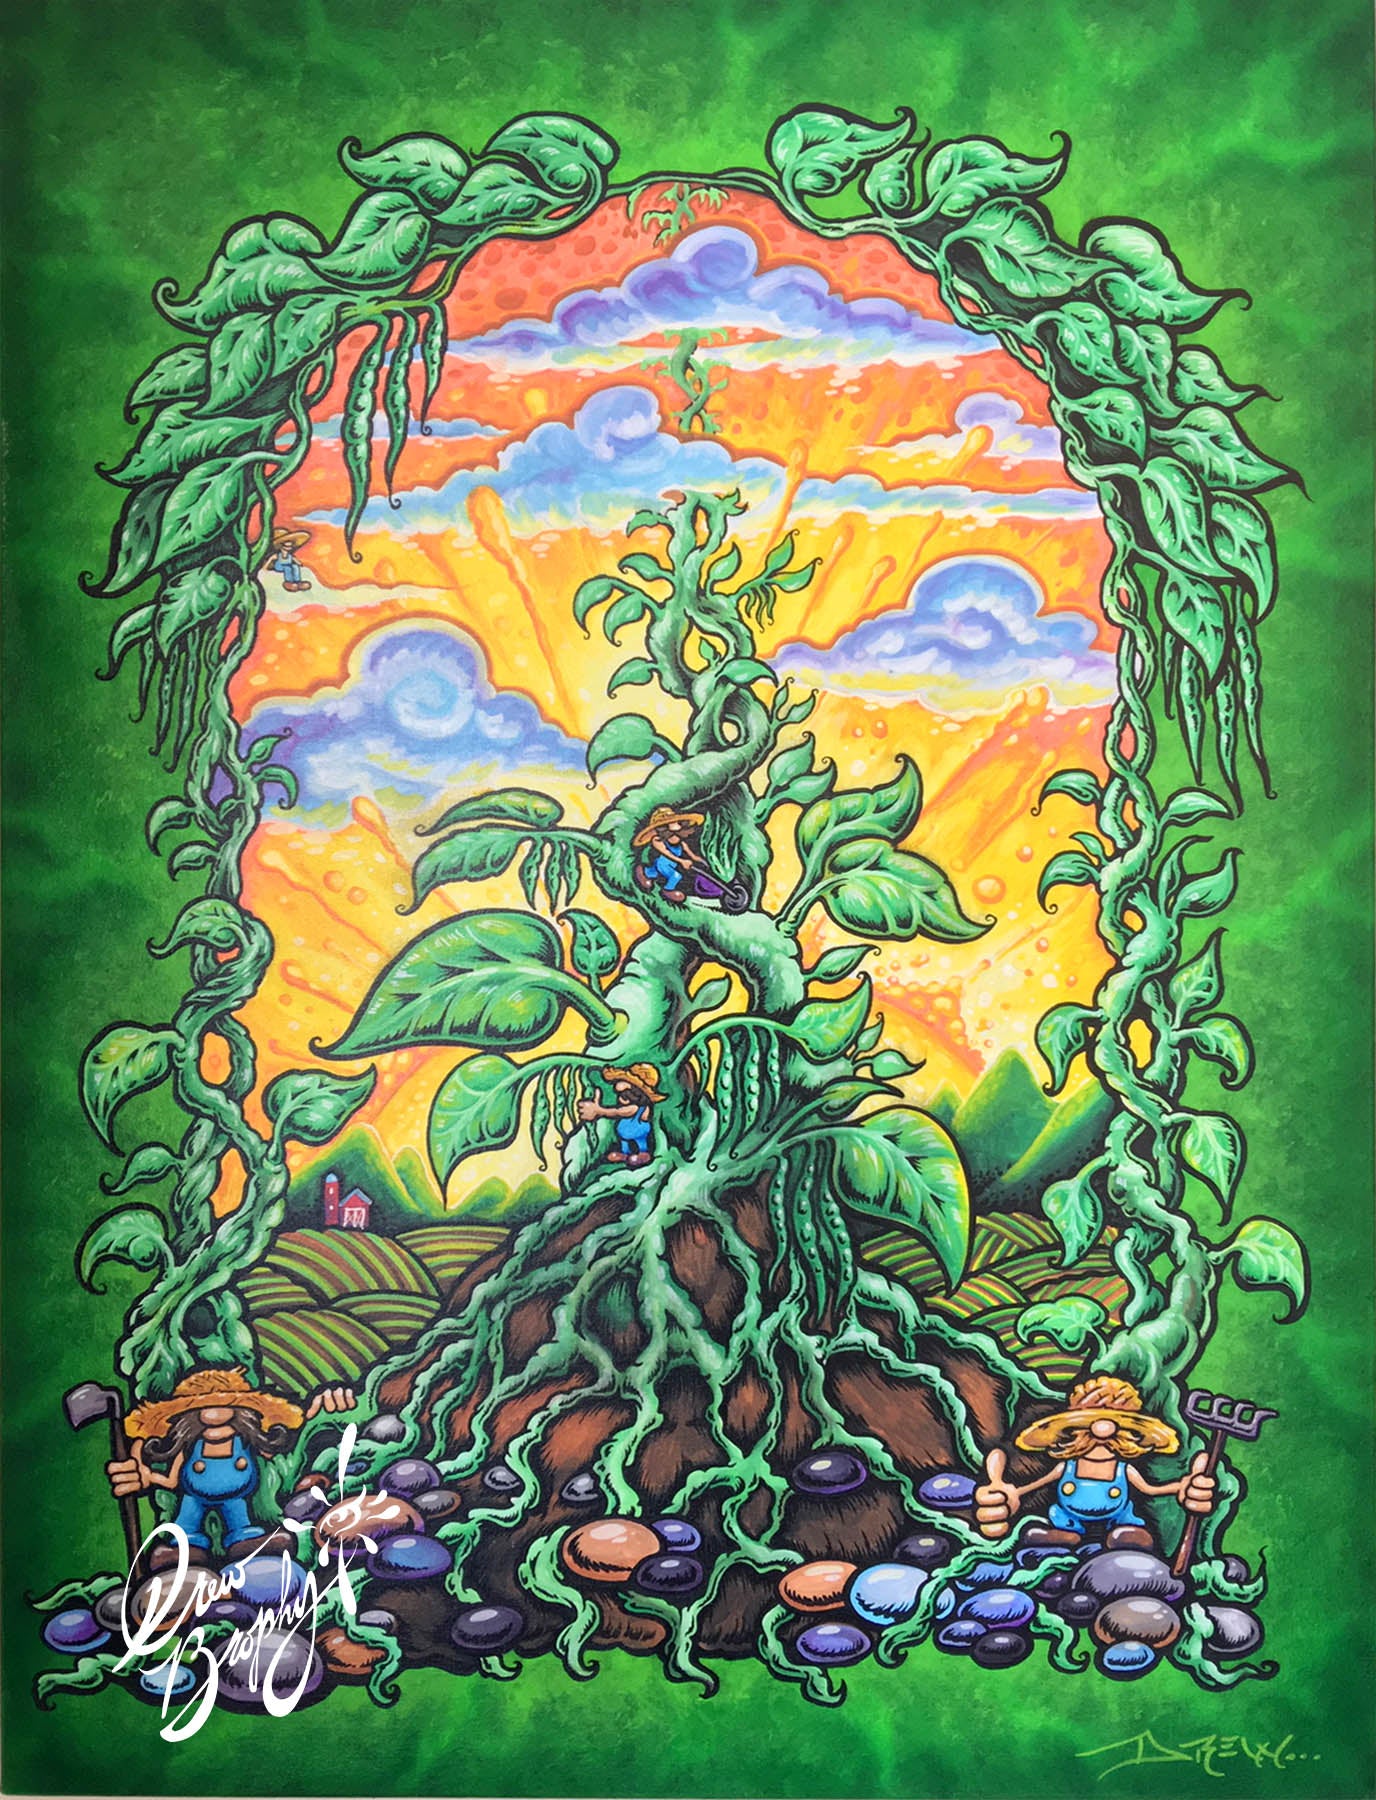 MAGIC BEANS 40" x 30" Original painting on Canvas by Drew Brophy - EARTH SERIES